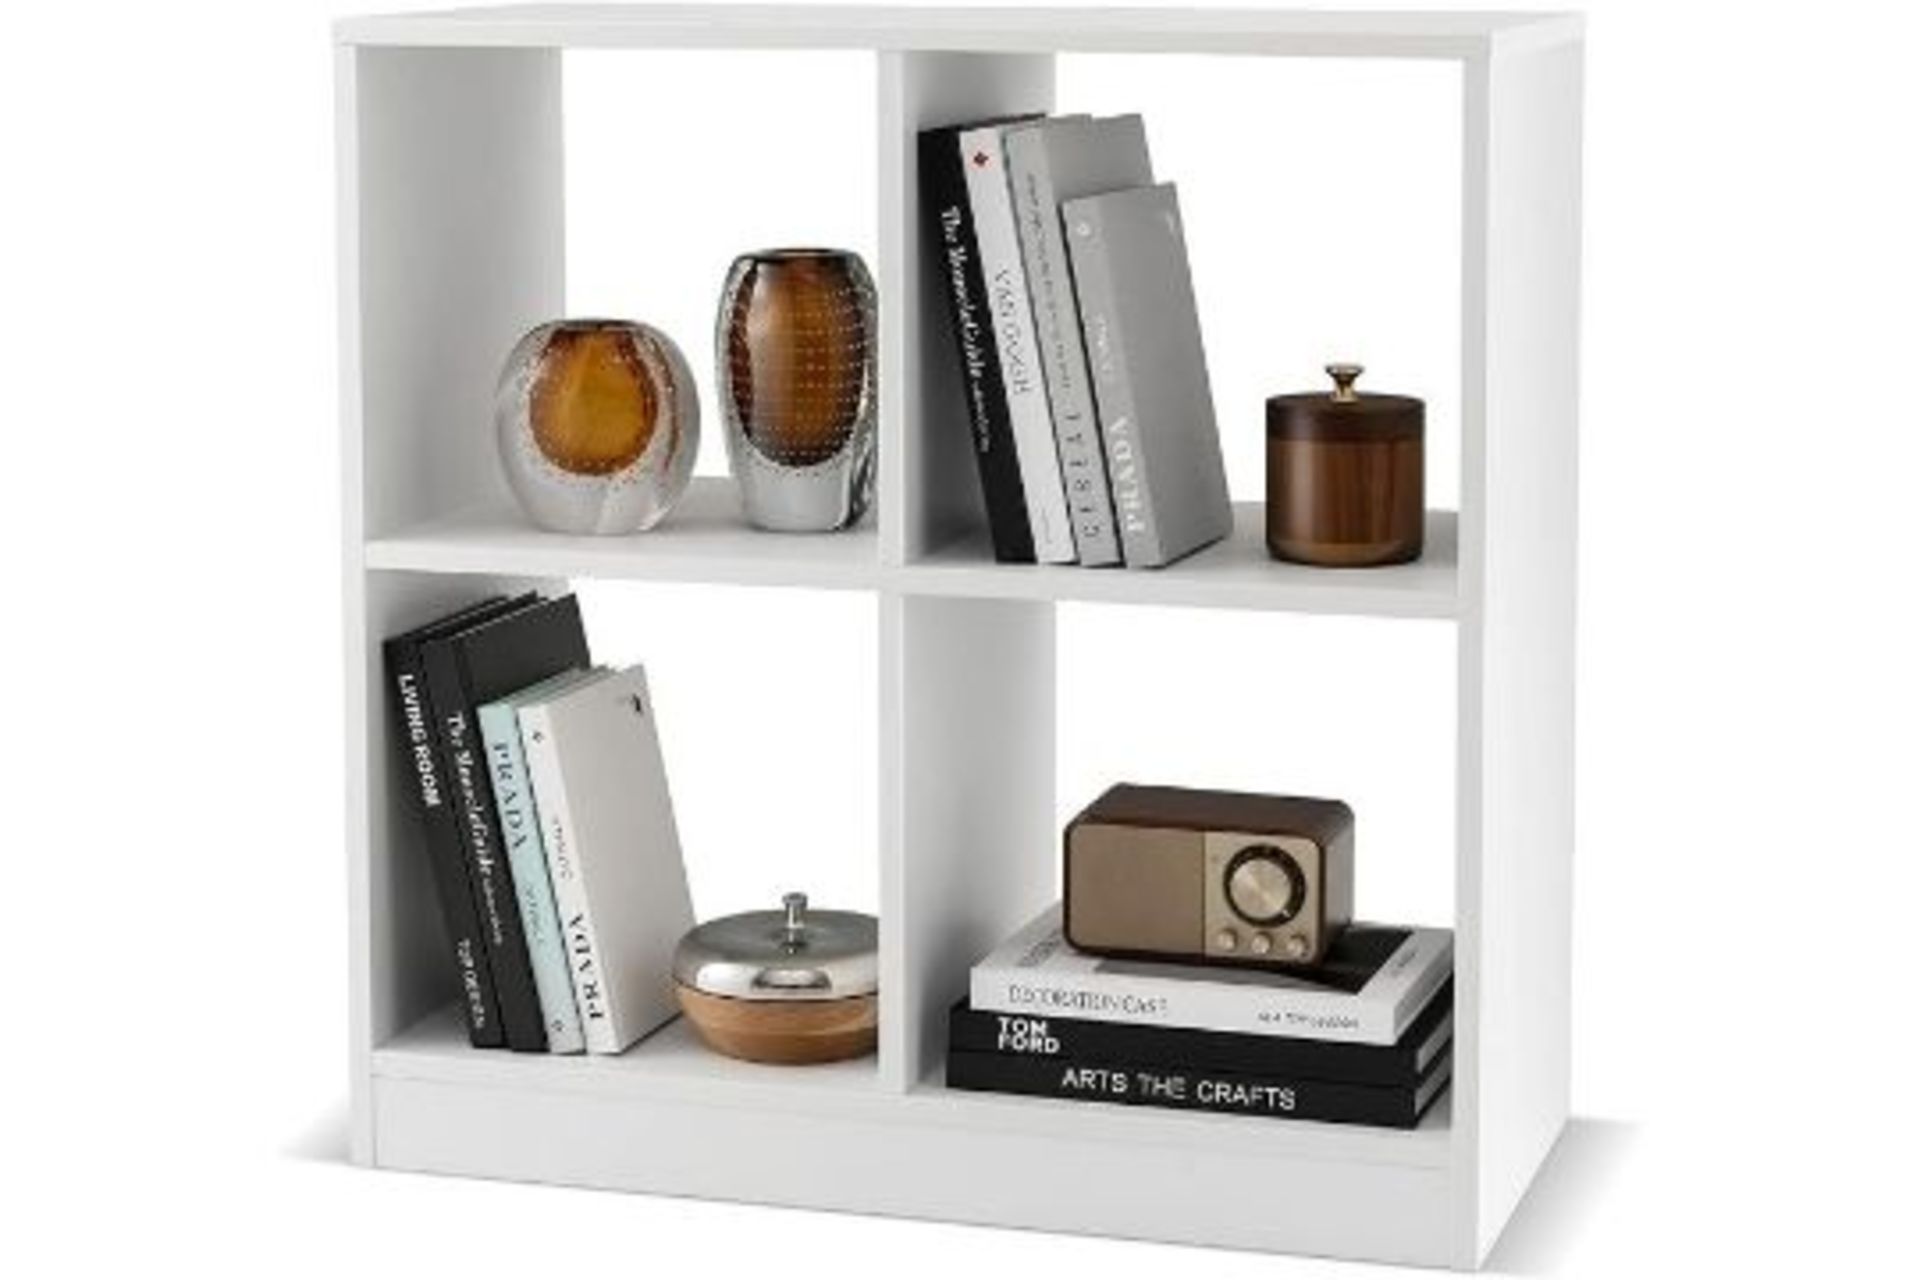 Luxury 4 Cube Bookcase, Wooden Storage Bookshelf Open Display Shelving Unit with Anti-Tipping